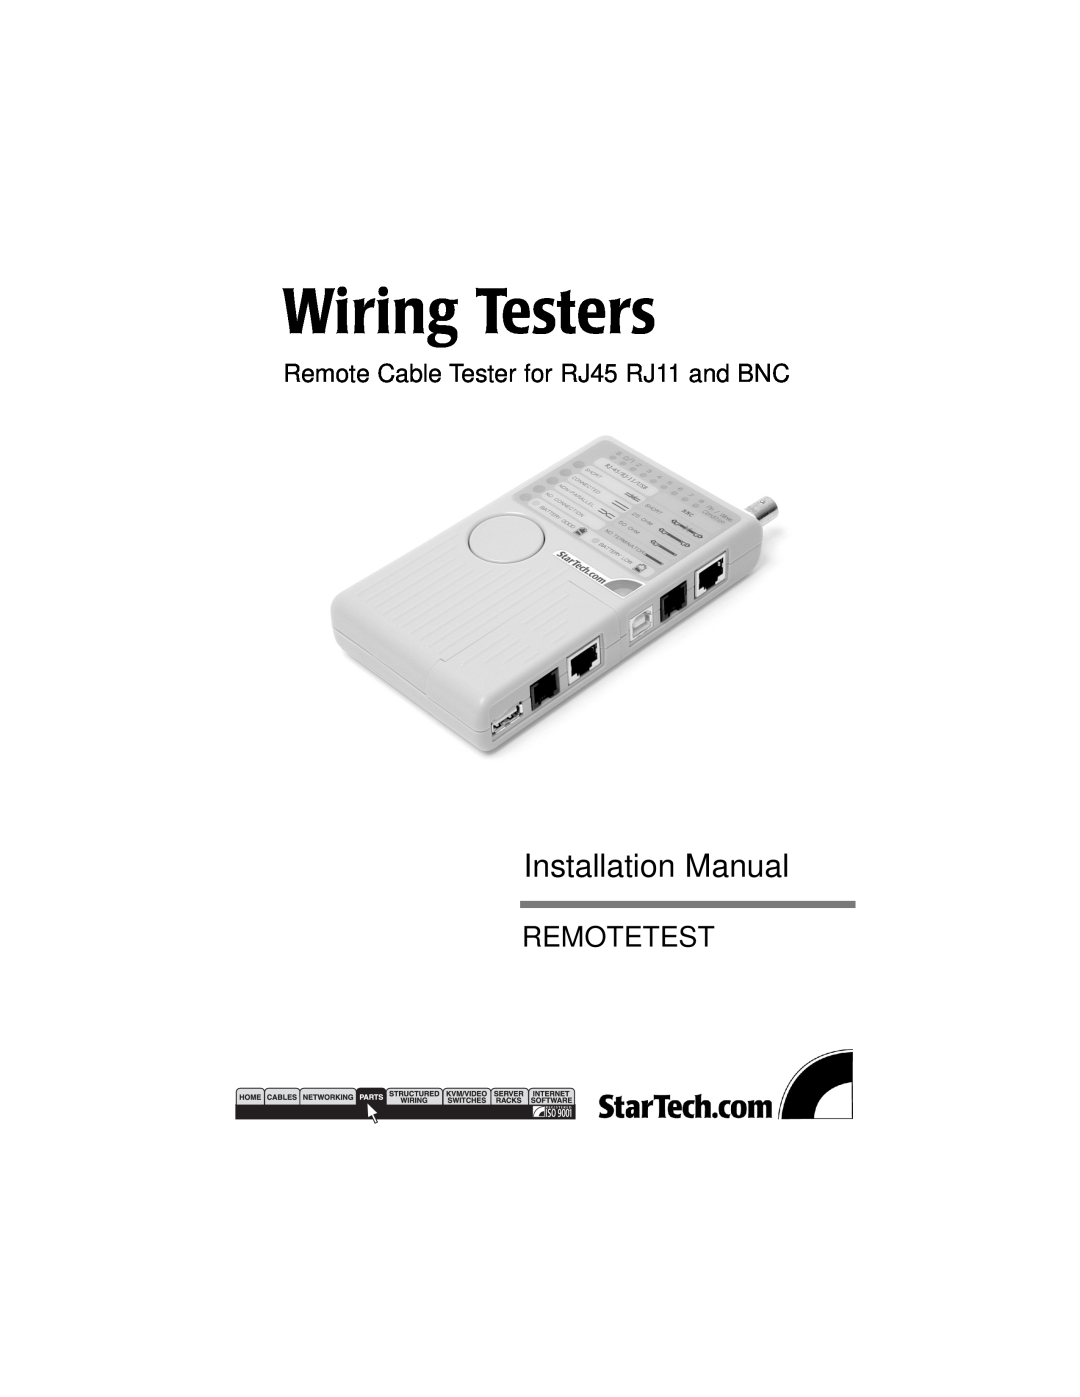 StarTech.com CTK400LAN Wiring Testers, Remotetest, Remote Cable Tester for RJ45 RJ11 and BNC, Installation Manual 